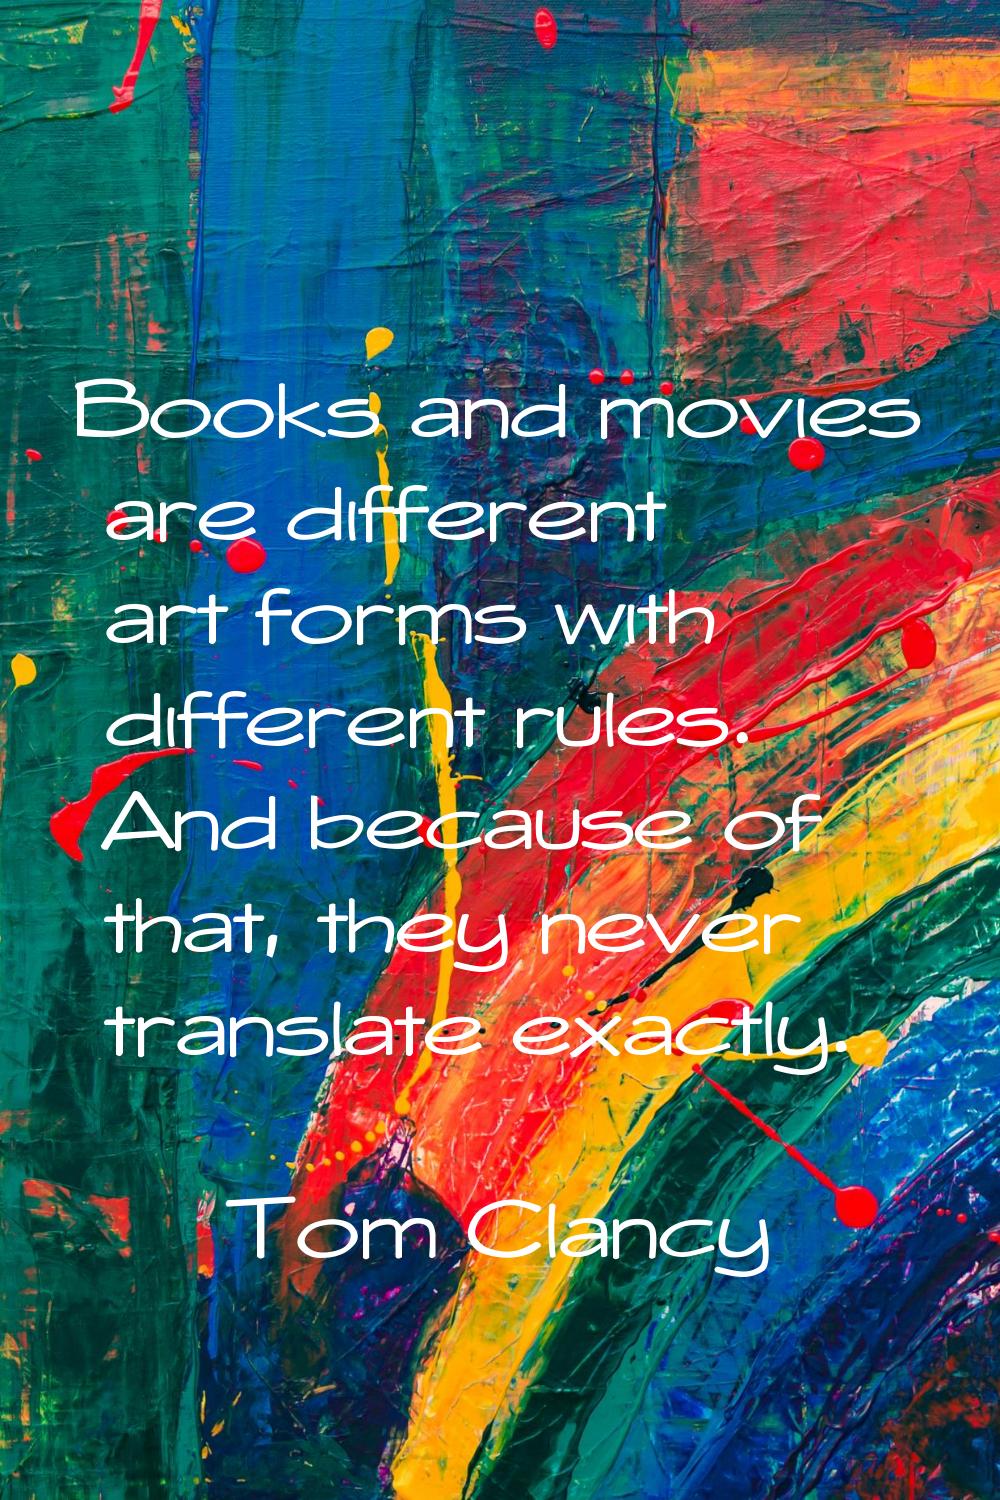 Books and movies are different art forms with different rules. And because of that, they never tran